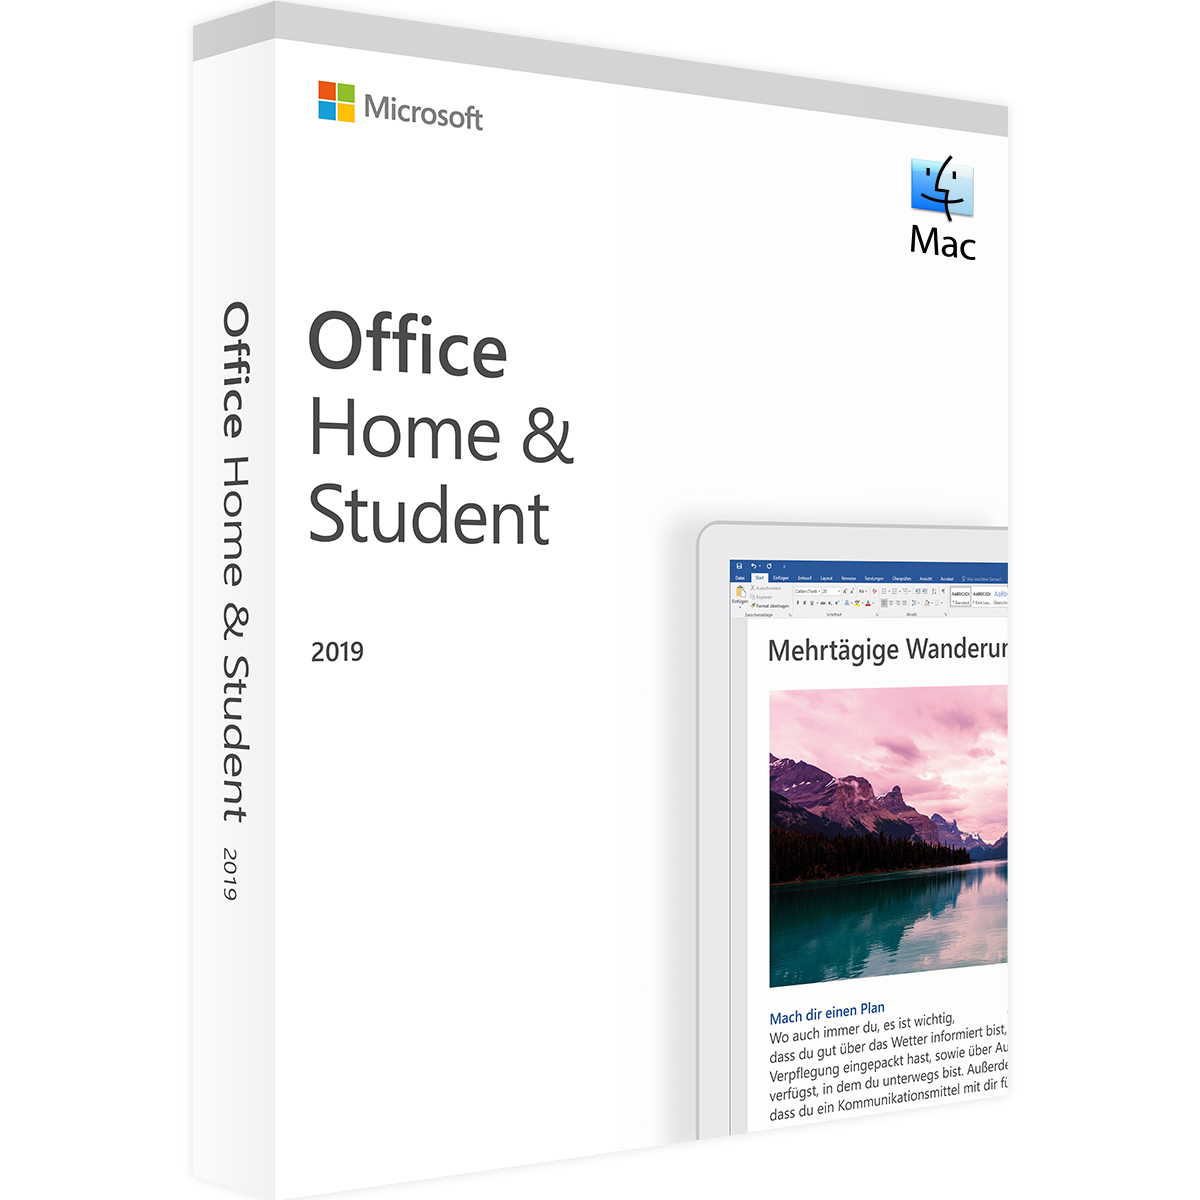 Office 2019 Home & Student for Mac